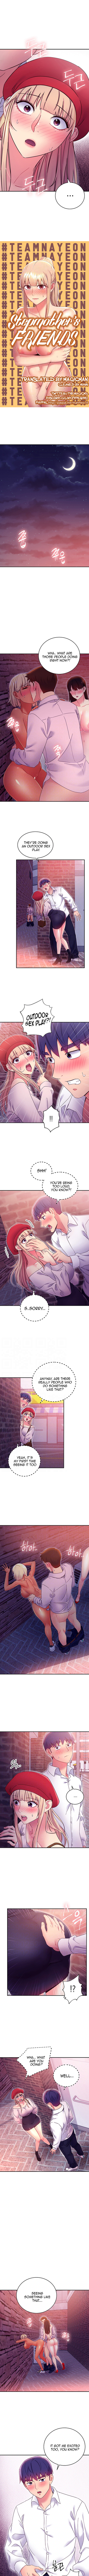 Panel Image 1 for chapter 69 of manhwa Stepmother